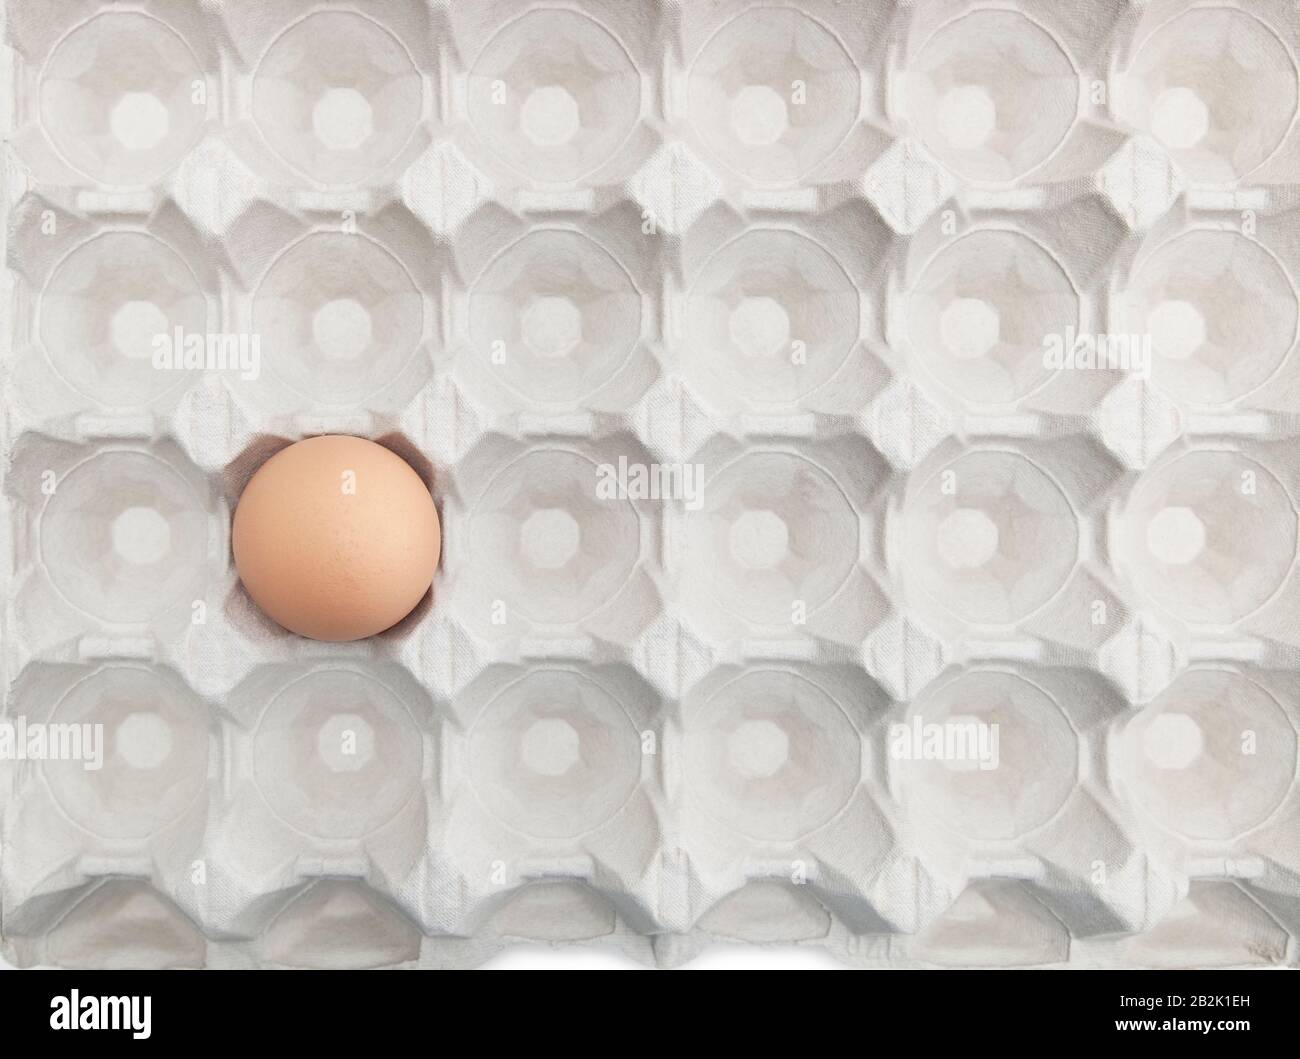 One brown egg in an empty carton Stock Photo